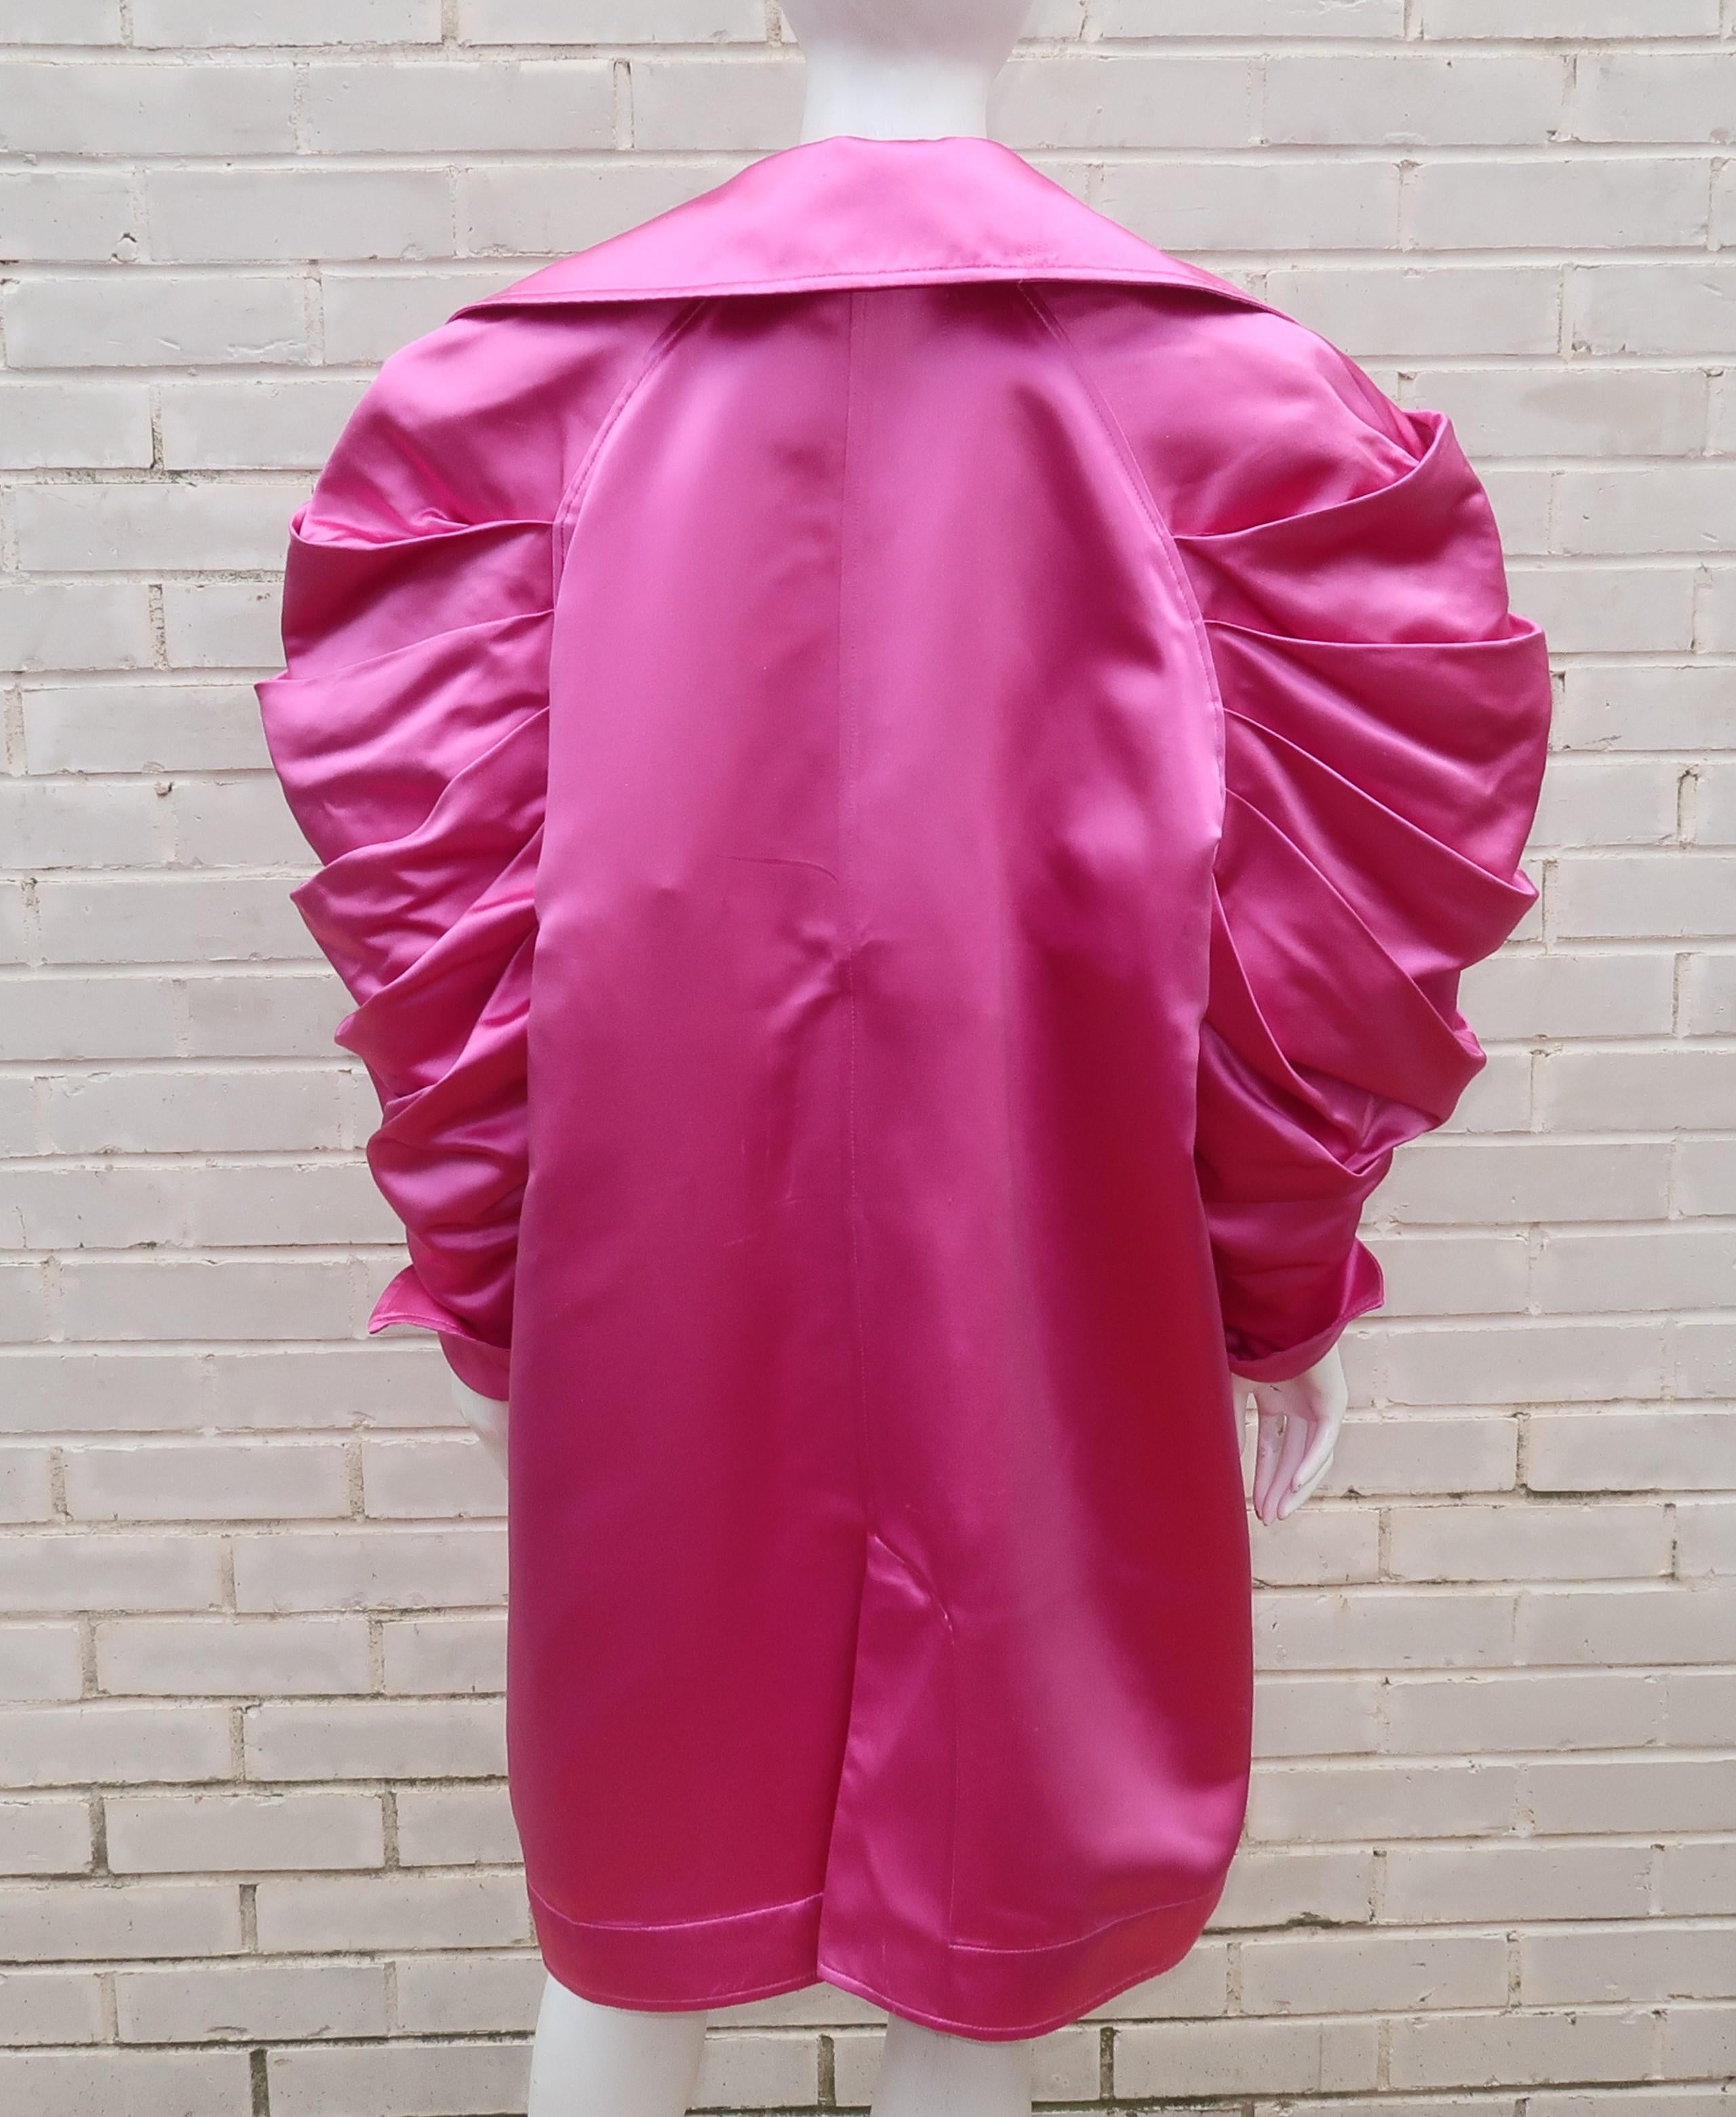 Claude Montana Hot Pink Silk Satin Coat With Ruched Sleeves, 1980's 2